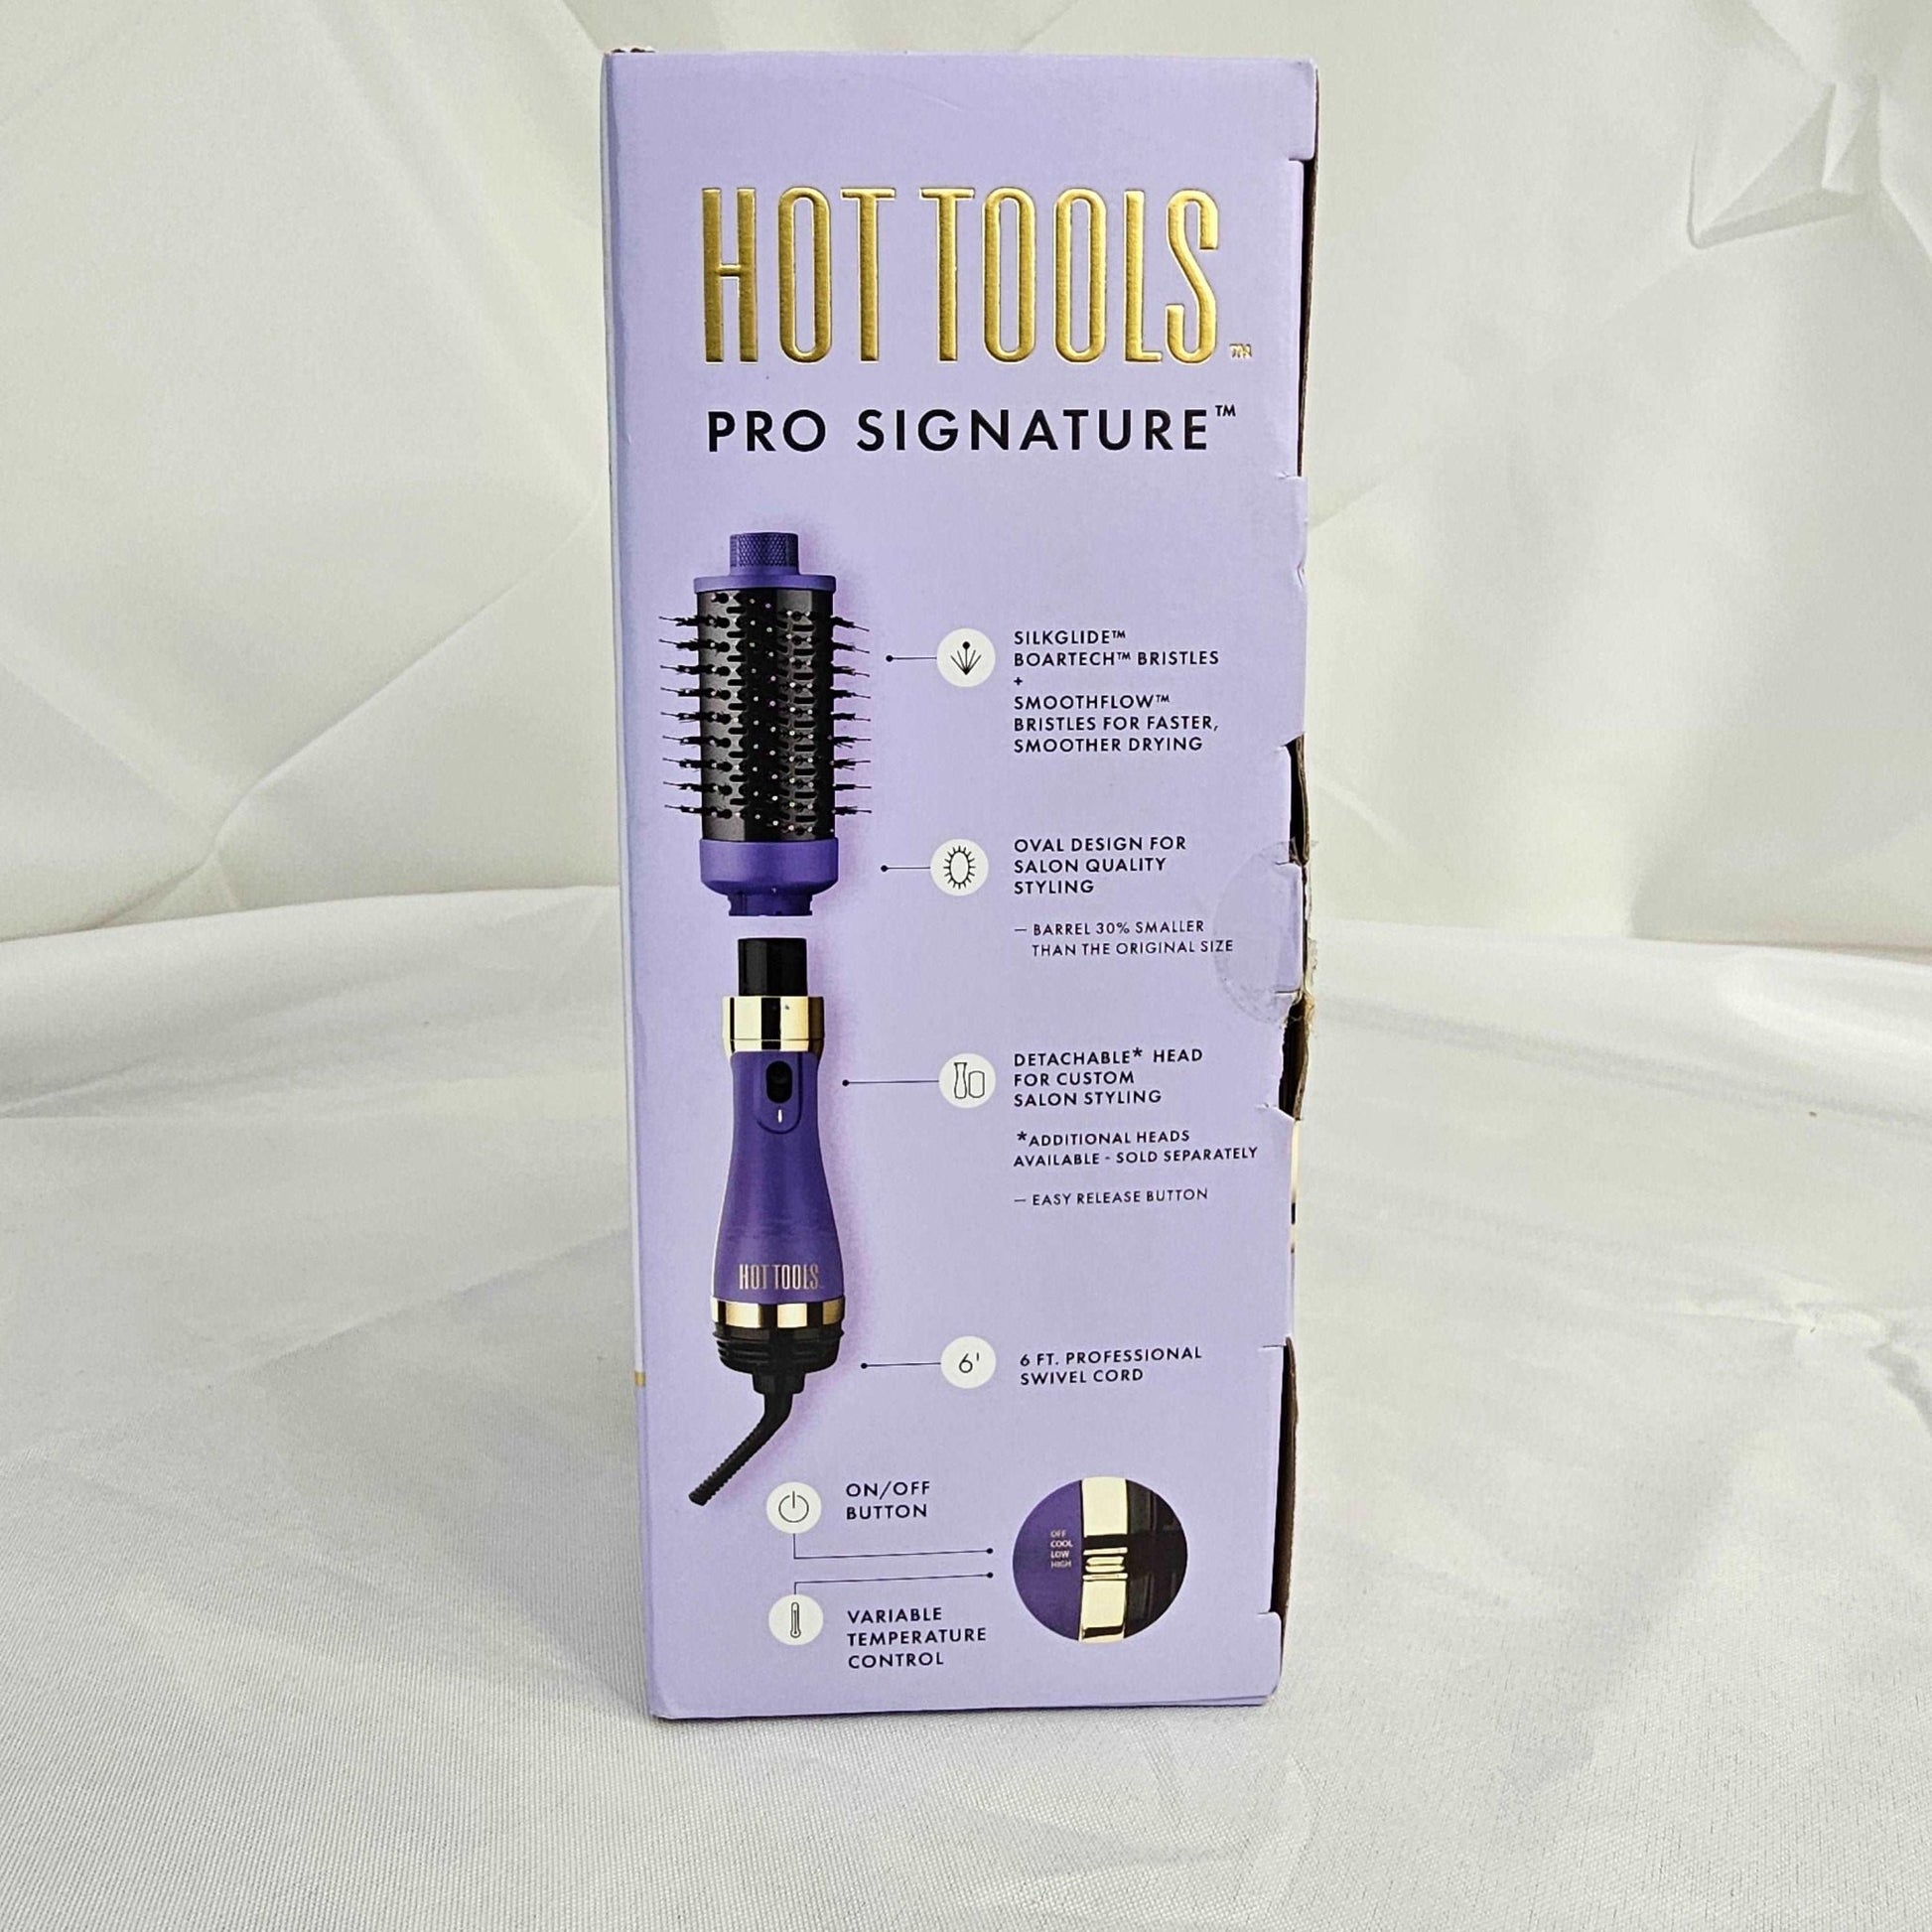 Small Detachable Blowout & Volumizer - Pro Blowouts in One Step - DQ Distribution